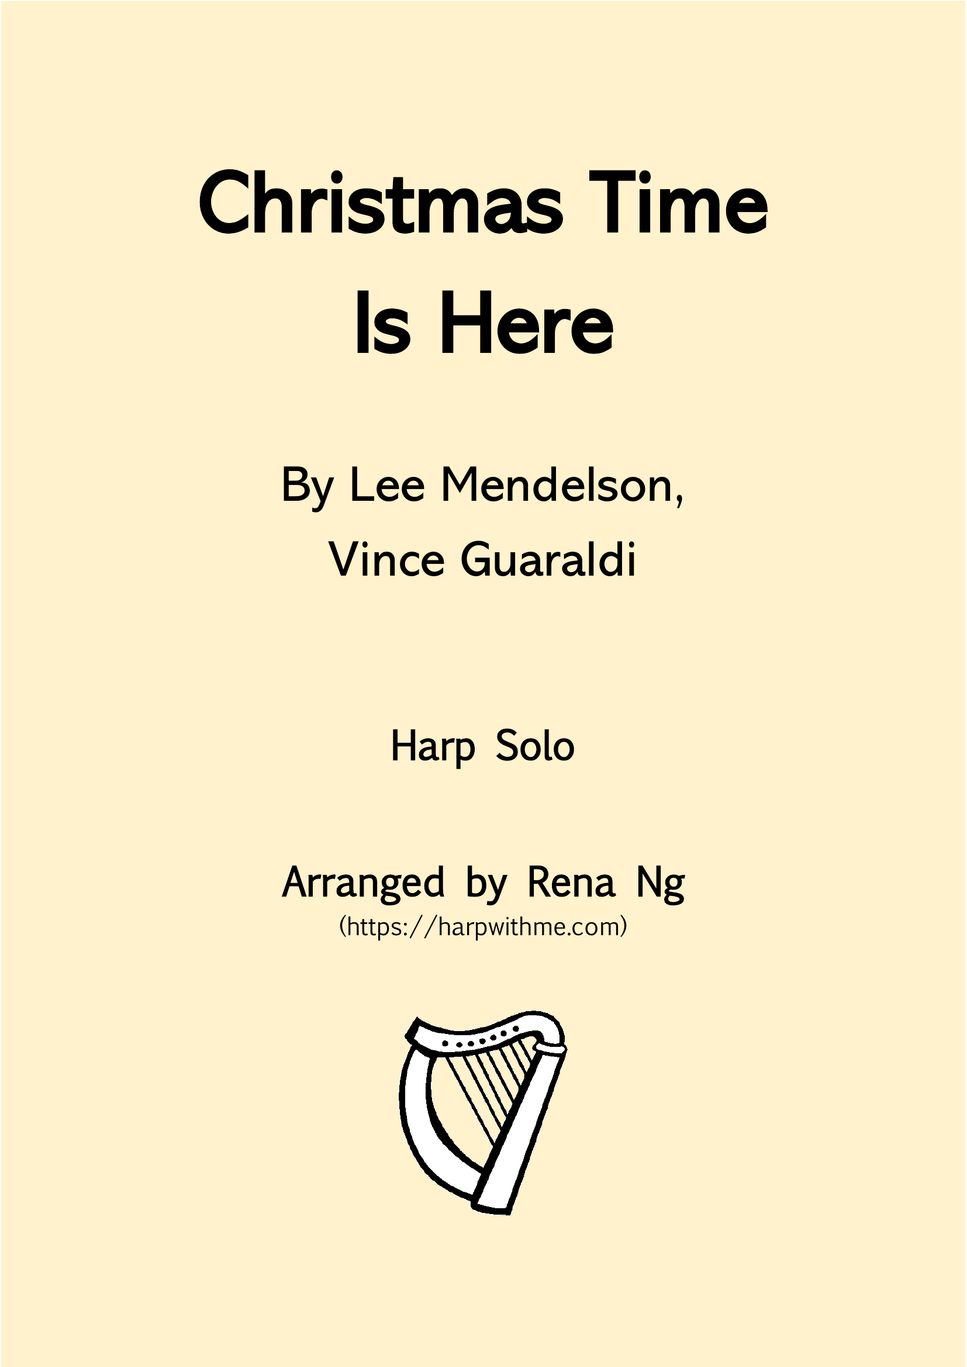 Vince Guaraldi - Christmas Time Is Here (Harp Solo) - Intermediate by Harp With Me